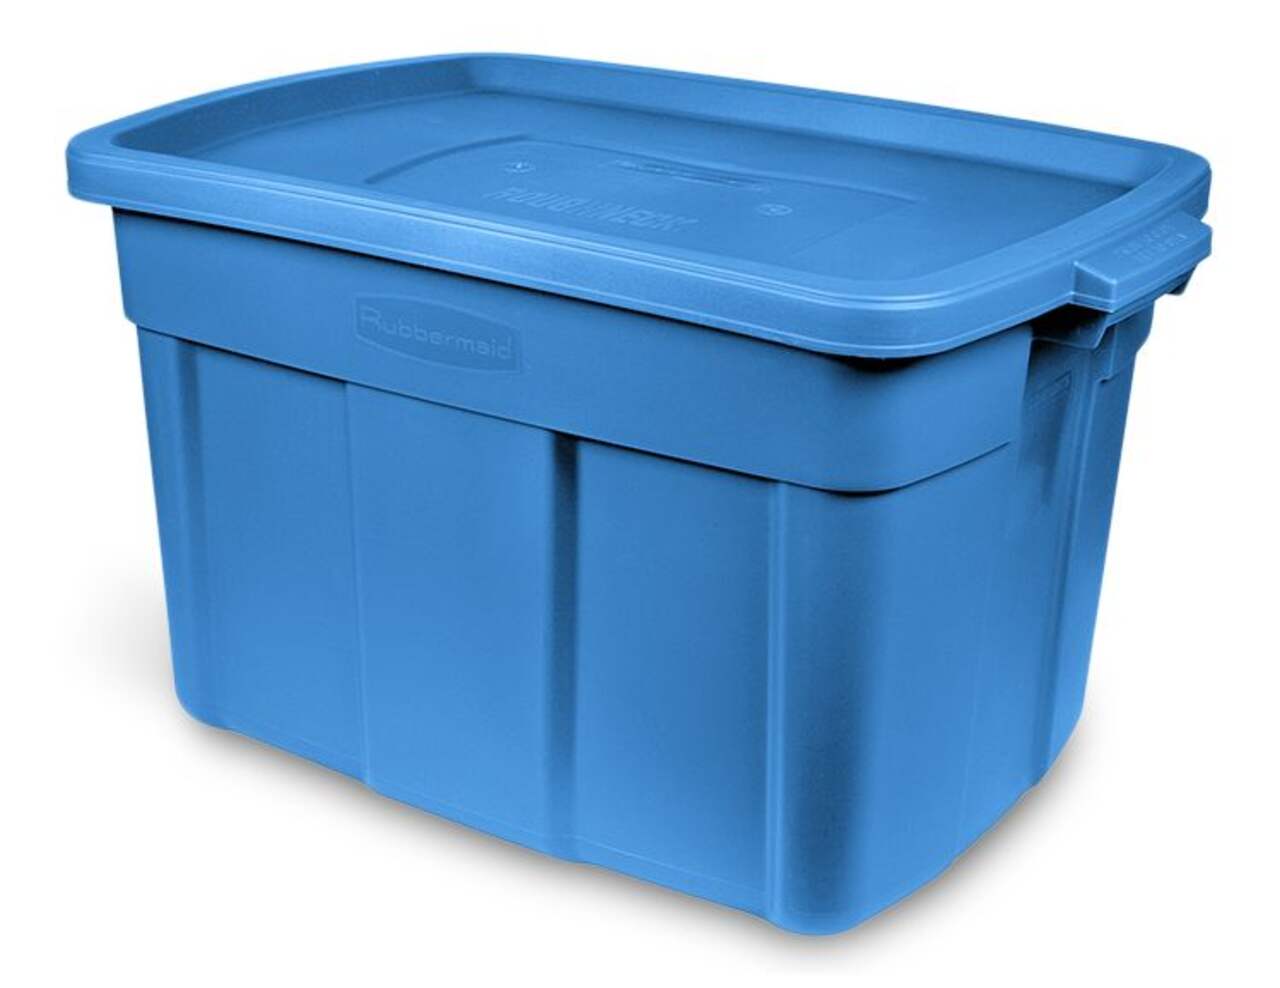 https://media-www.canadiantire.ca/product/living/home-organization/storage-containers/0422963/rubbermaid-roughneck-tote-68-1l-1f40fcaa-74ea-474c-ba66-57c48cba5677-jpgrendition.jpg?imdensity=1&imwidth=640&impolicy=mZoom